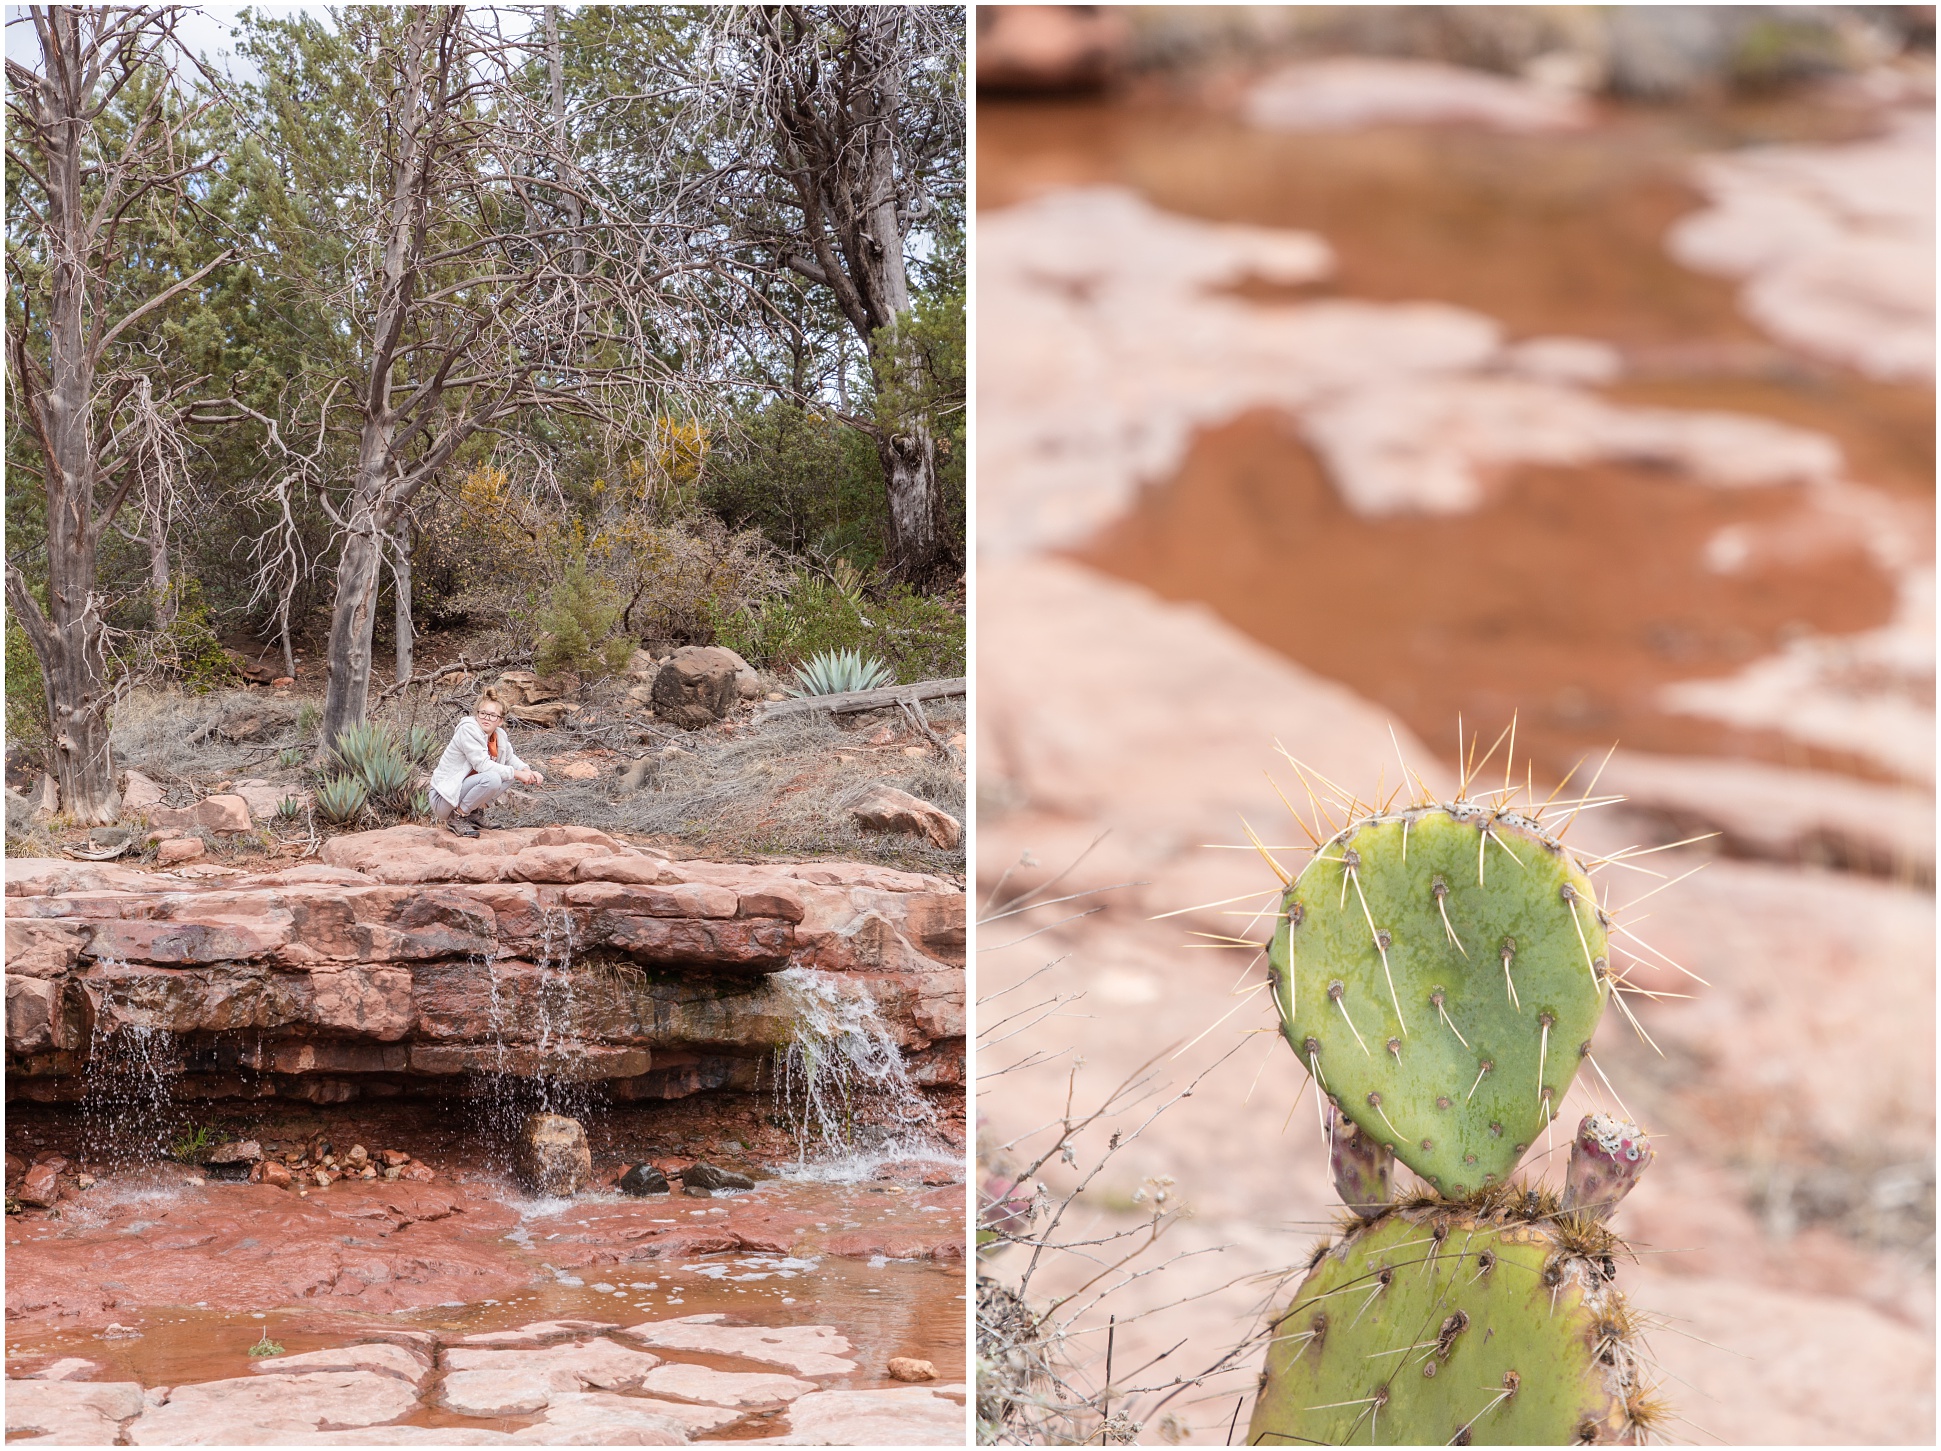 Left: My daughter playing in the creek at Schnebly Hill, Right: Cactus growing in the creek at Schnebly Hill